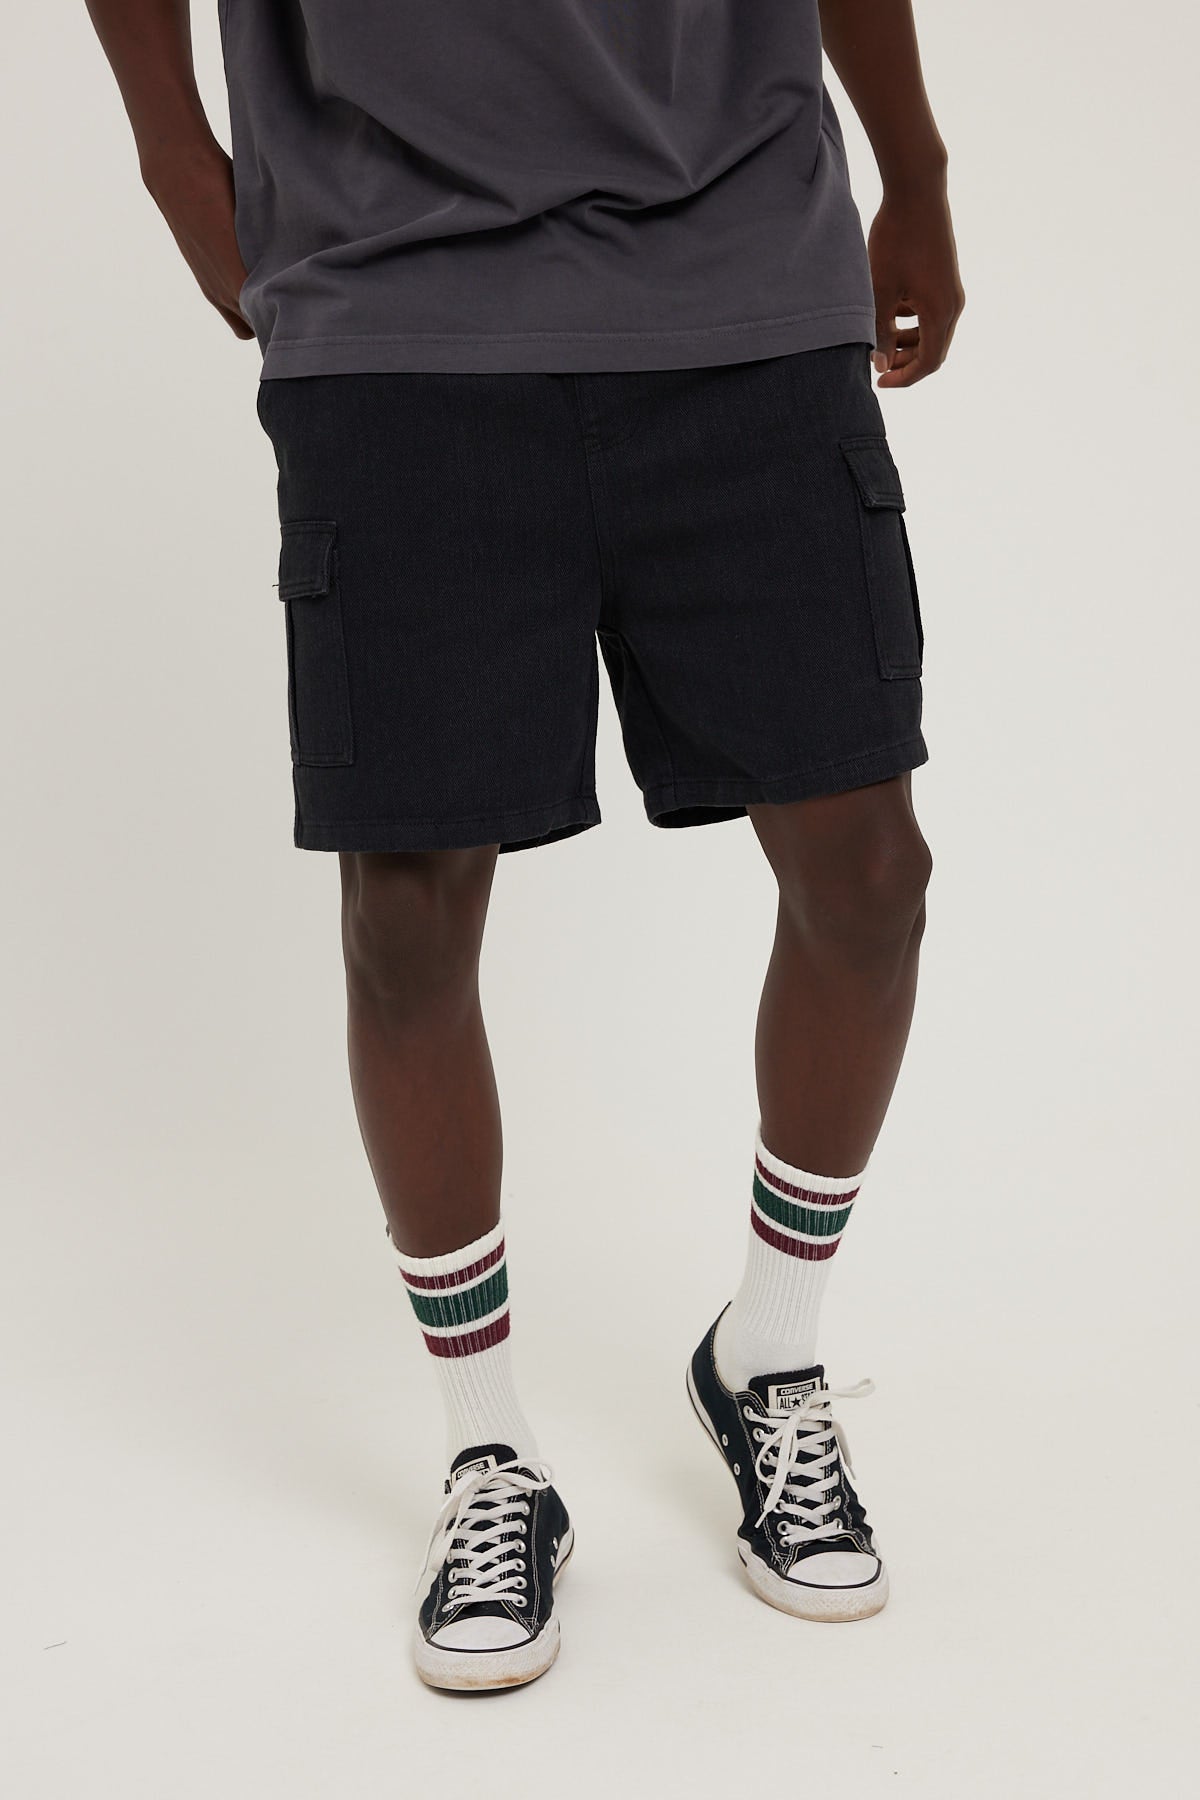 Common Need Relaxed Cargo Short Black